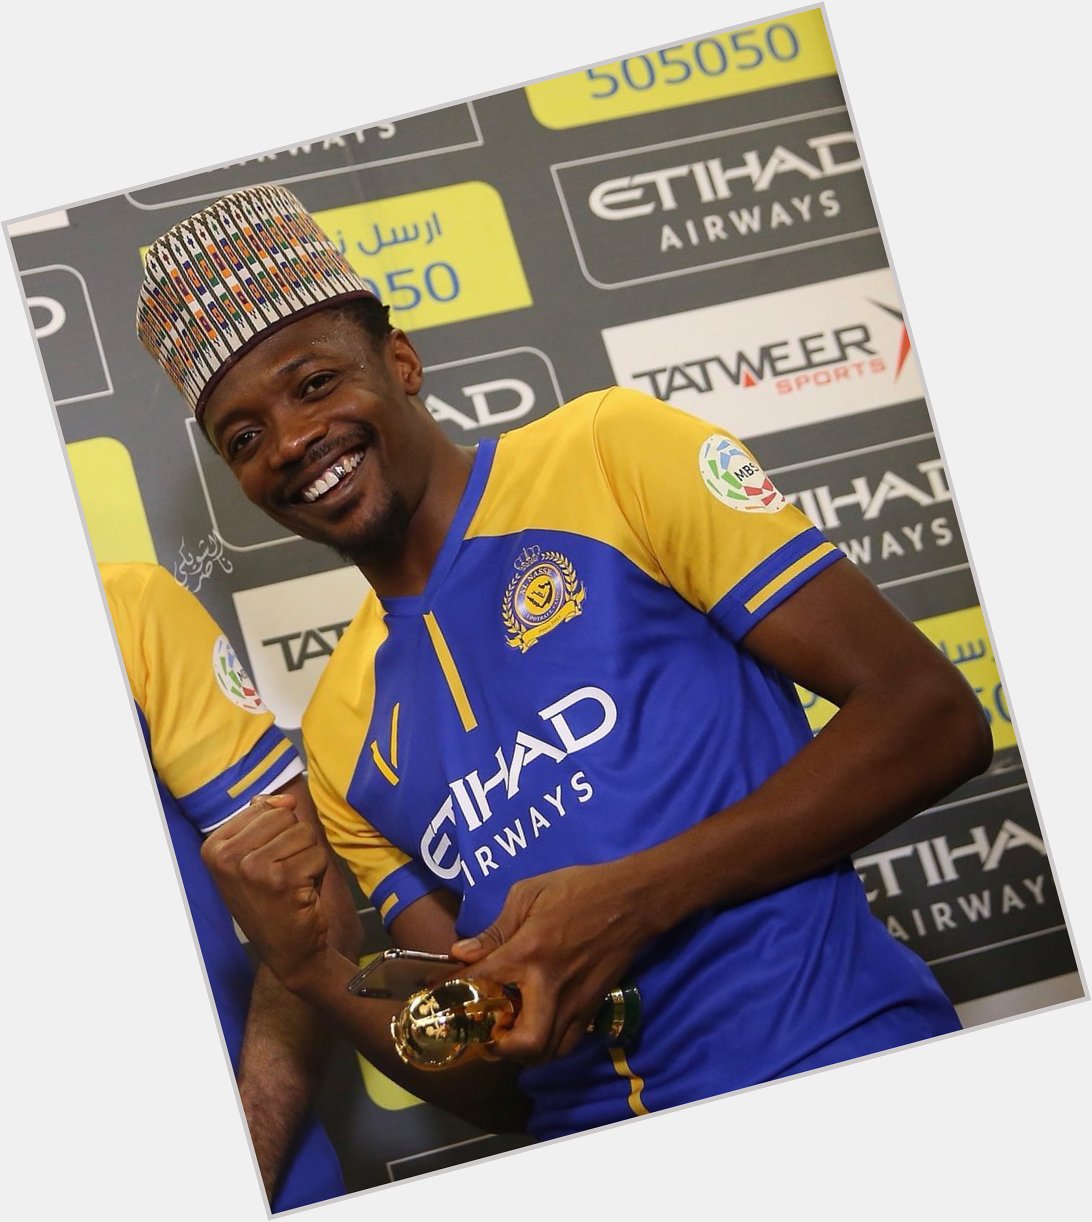  Happy birthday to the eagle Ahmed musa  